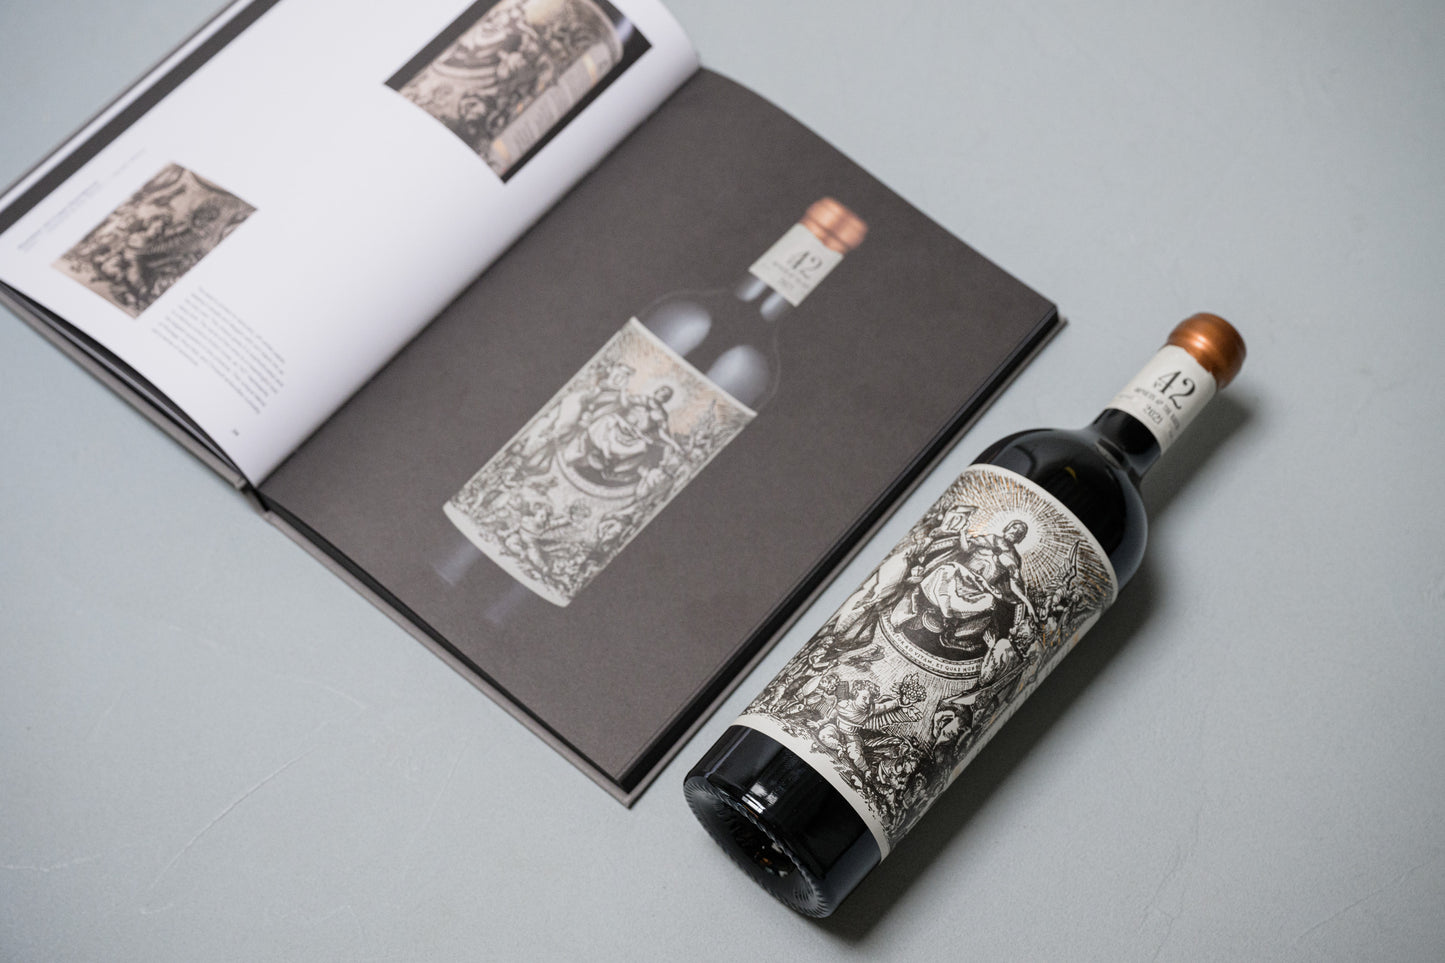 Ode to the wine bottle - Hardcover book (English-speaking)